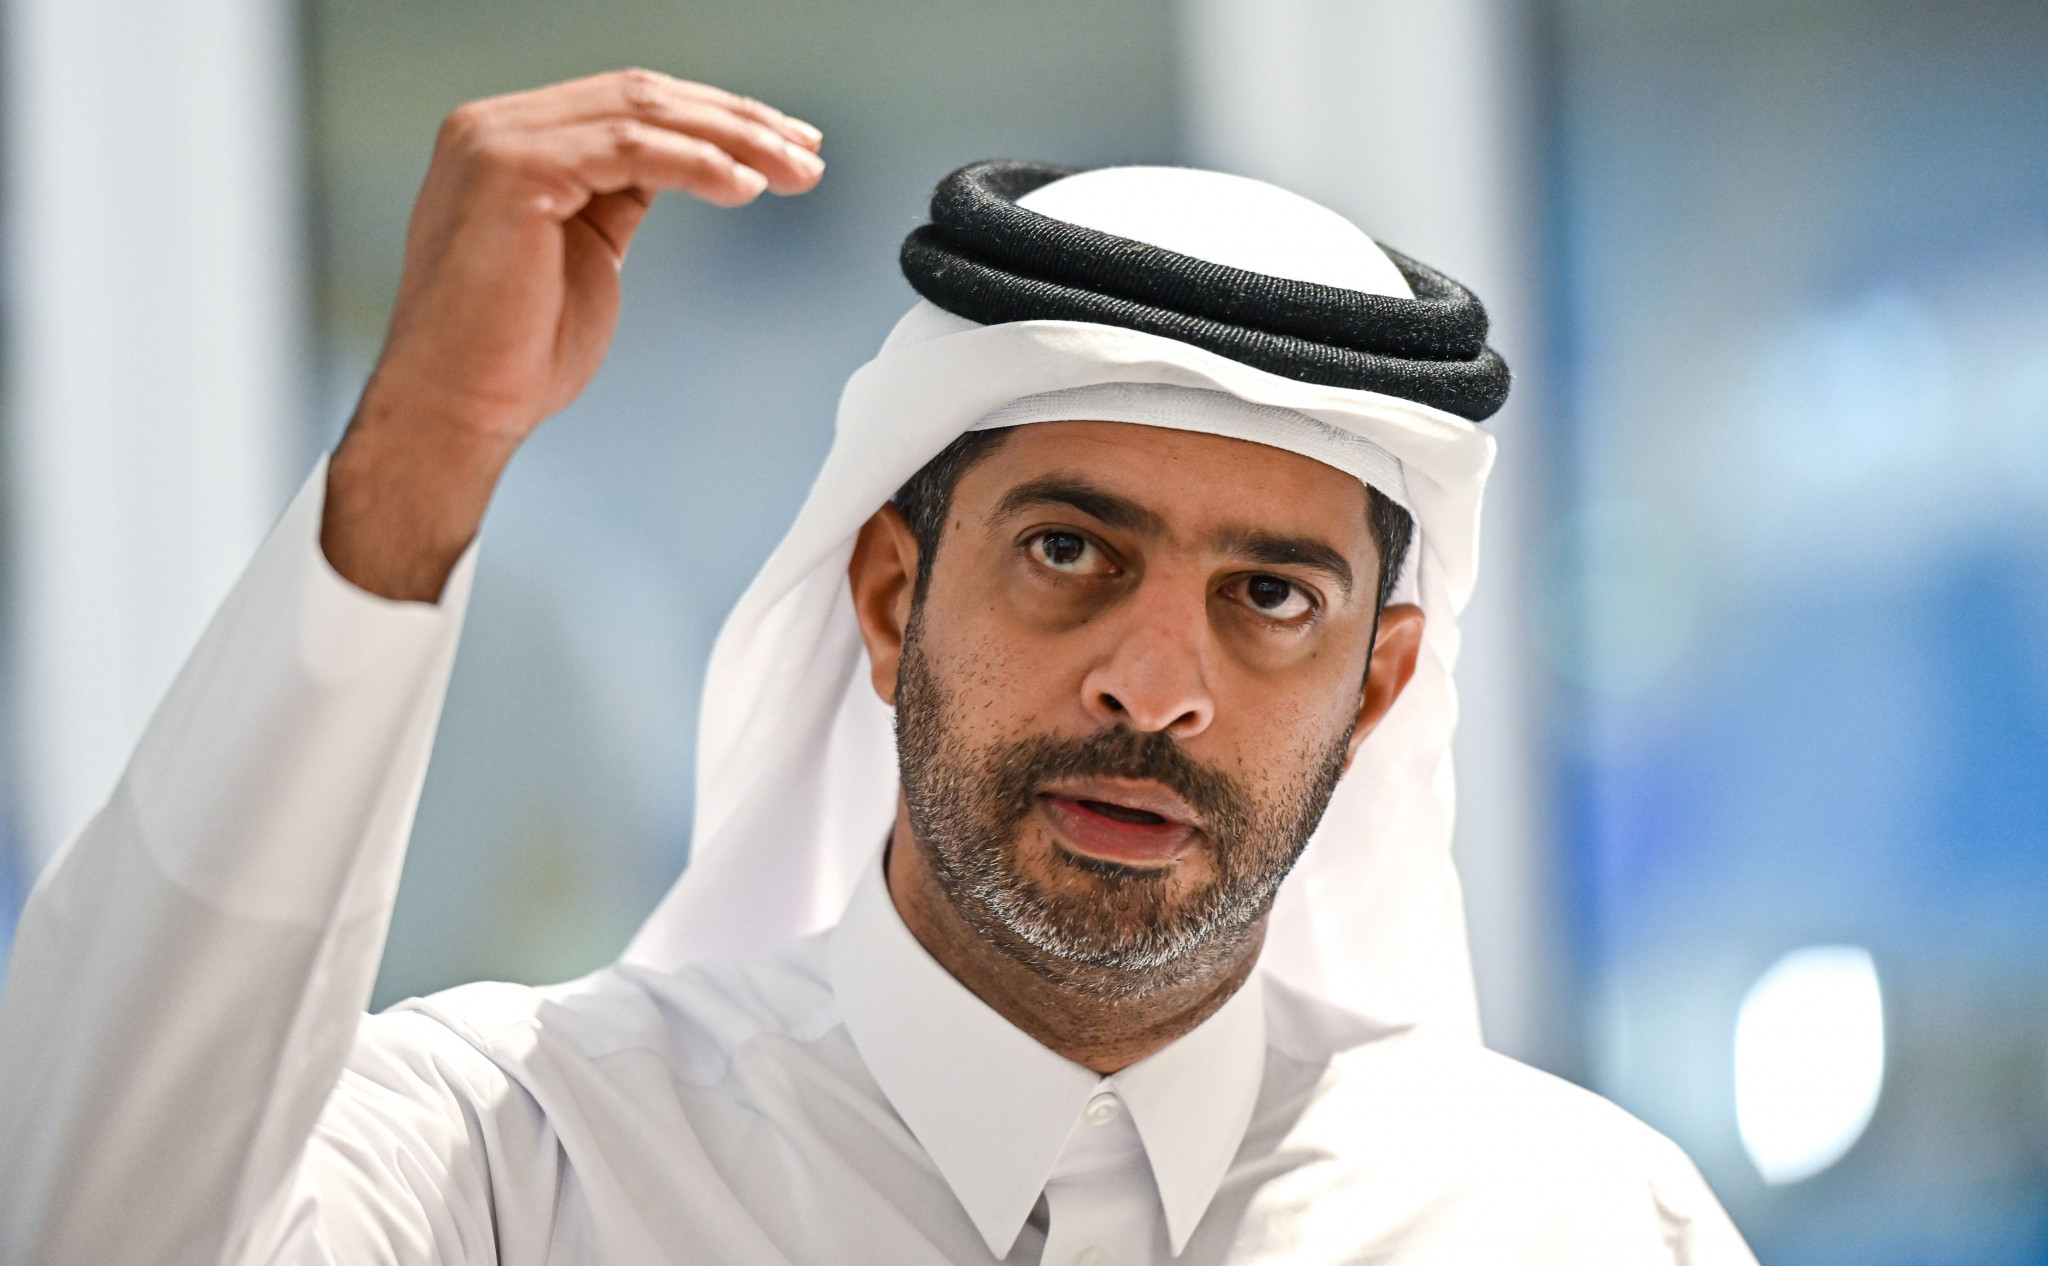 Qatar 2022 chief executive Nasser Al Khater has called for a meeting with Gareth Southgate ©Getty Images